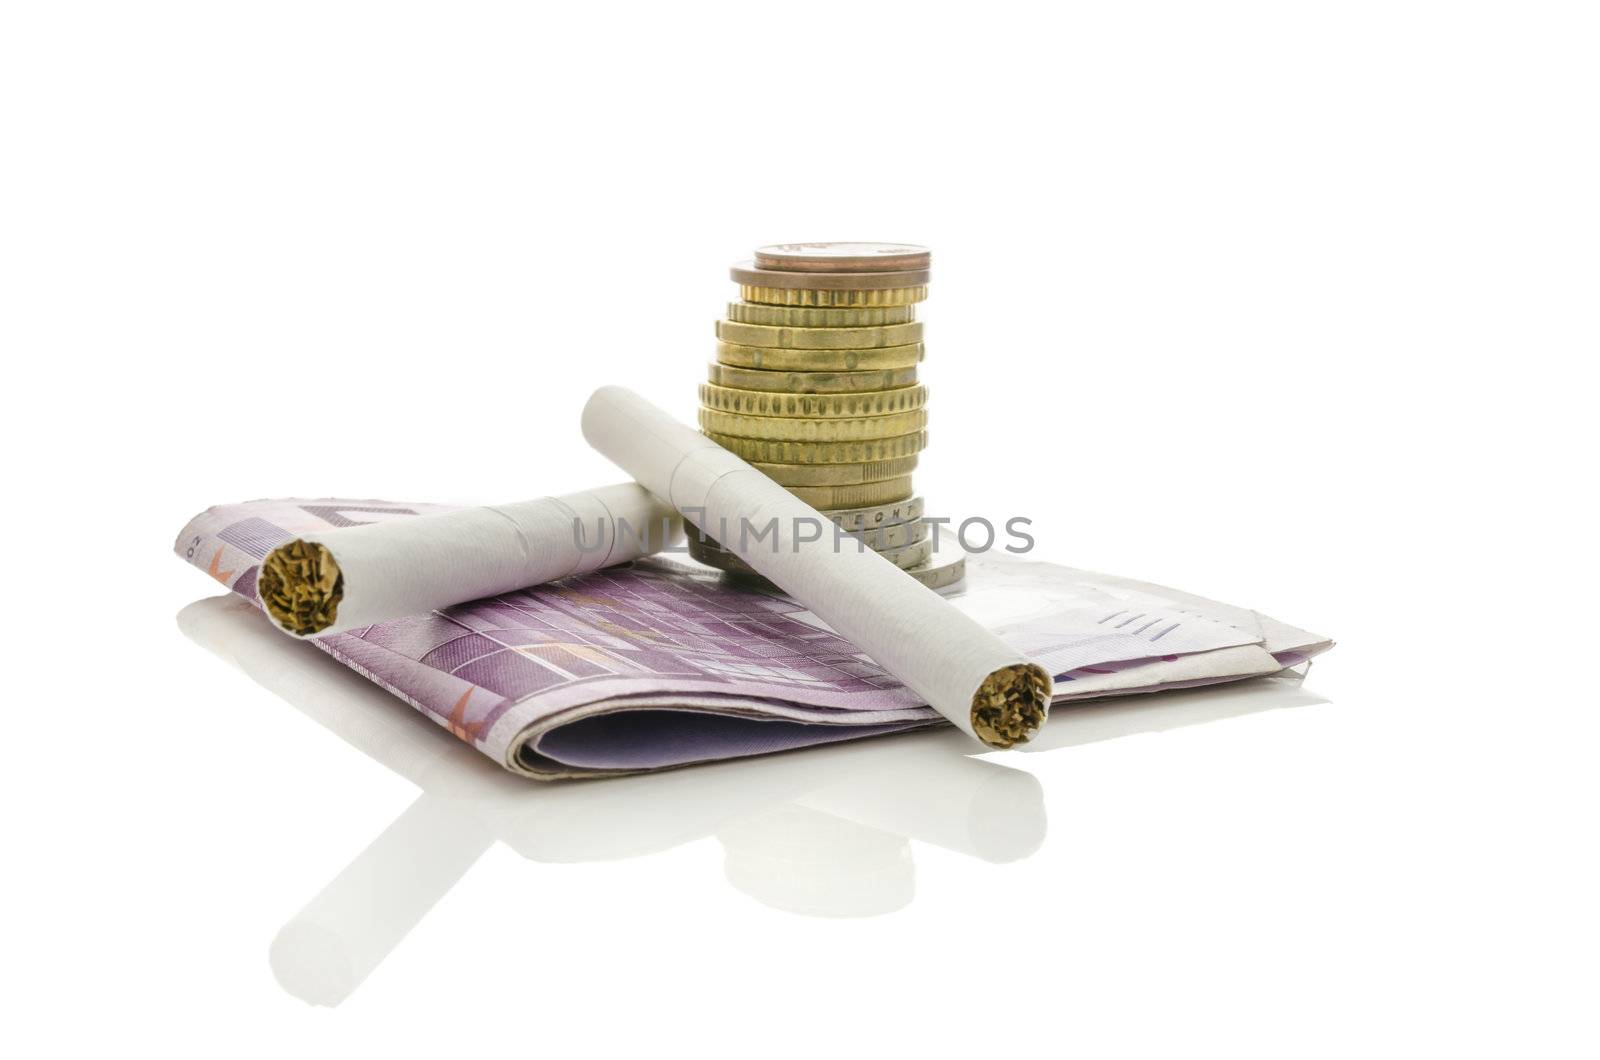 Two cigarettes with stack of Euro coins and banknotes. Isolated over white background. Concept of expensive smoking habit.